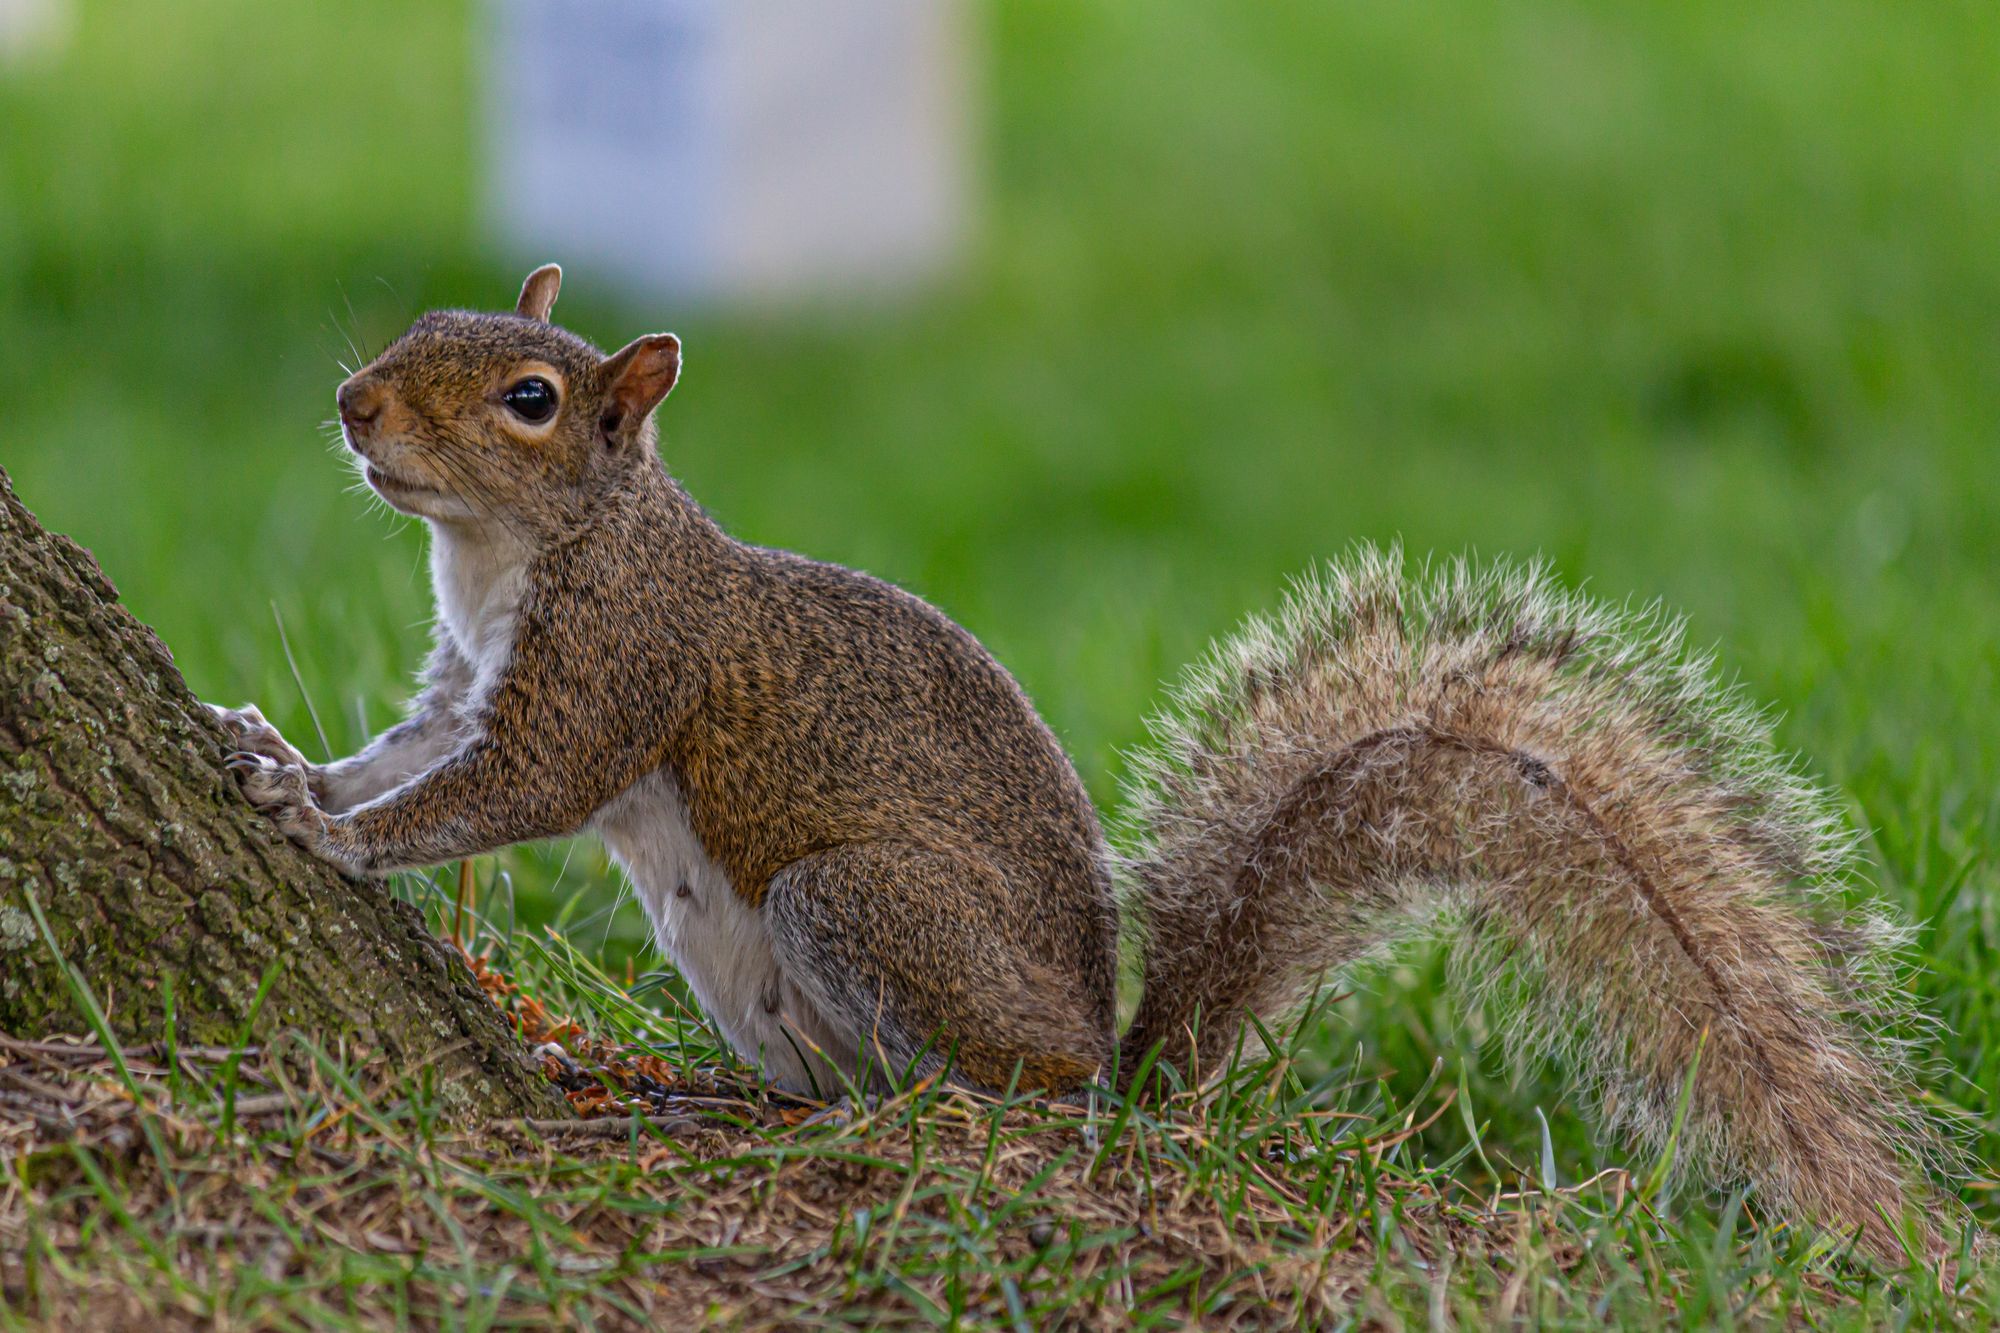 Do Squirrels Eat Insects, Worms, and Other Bugs?